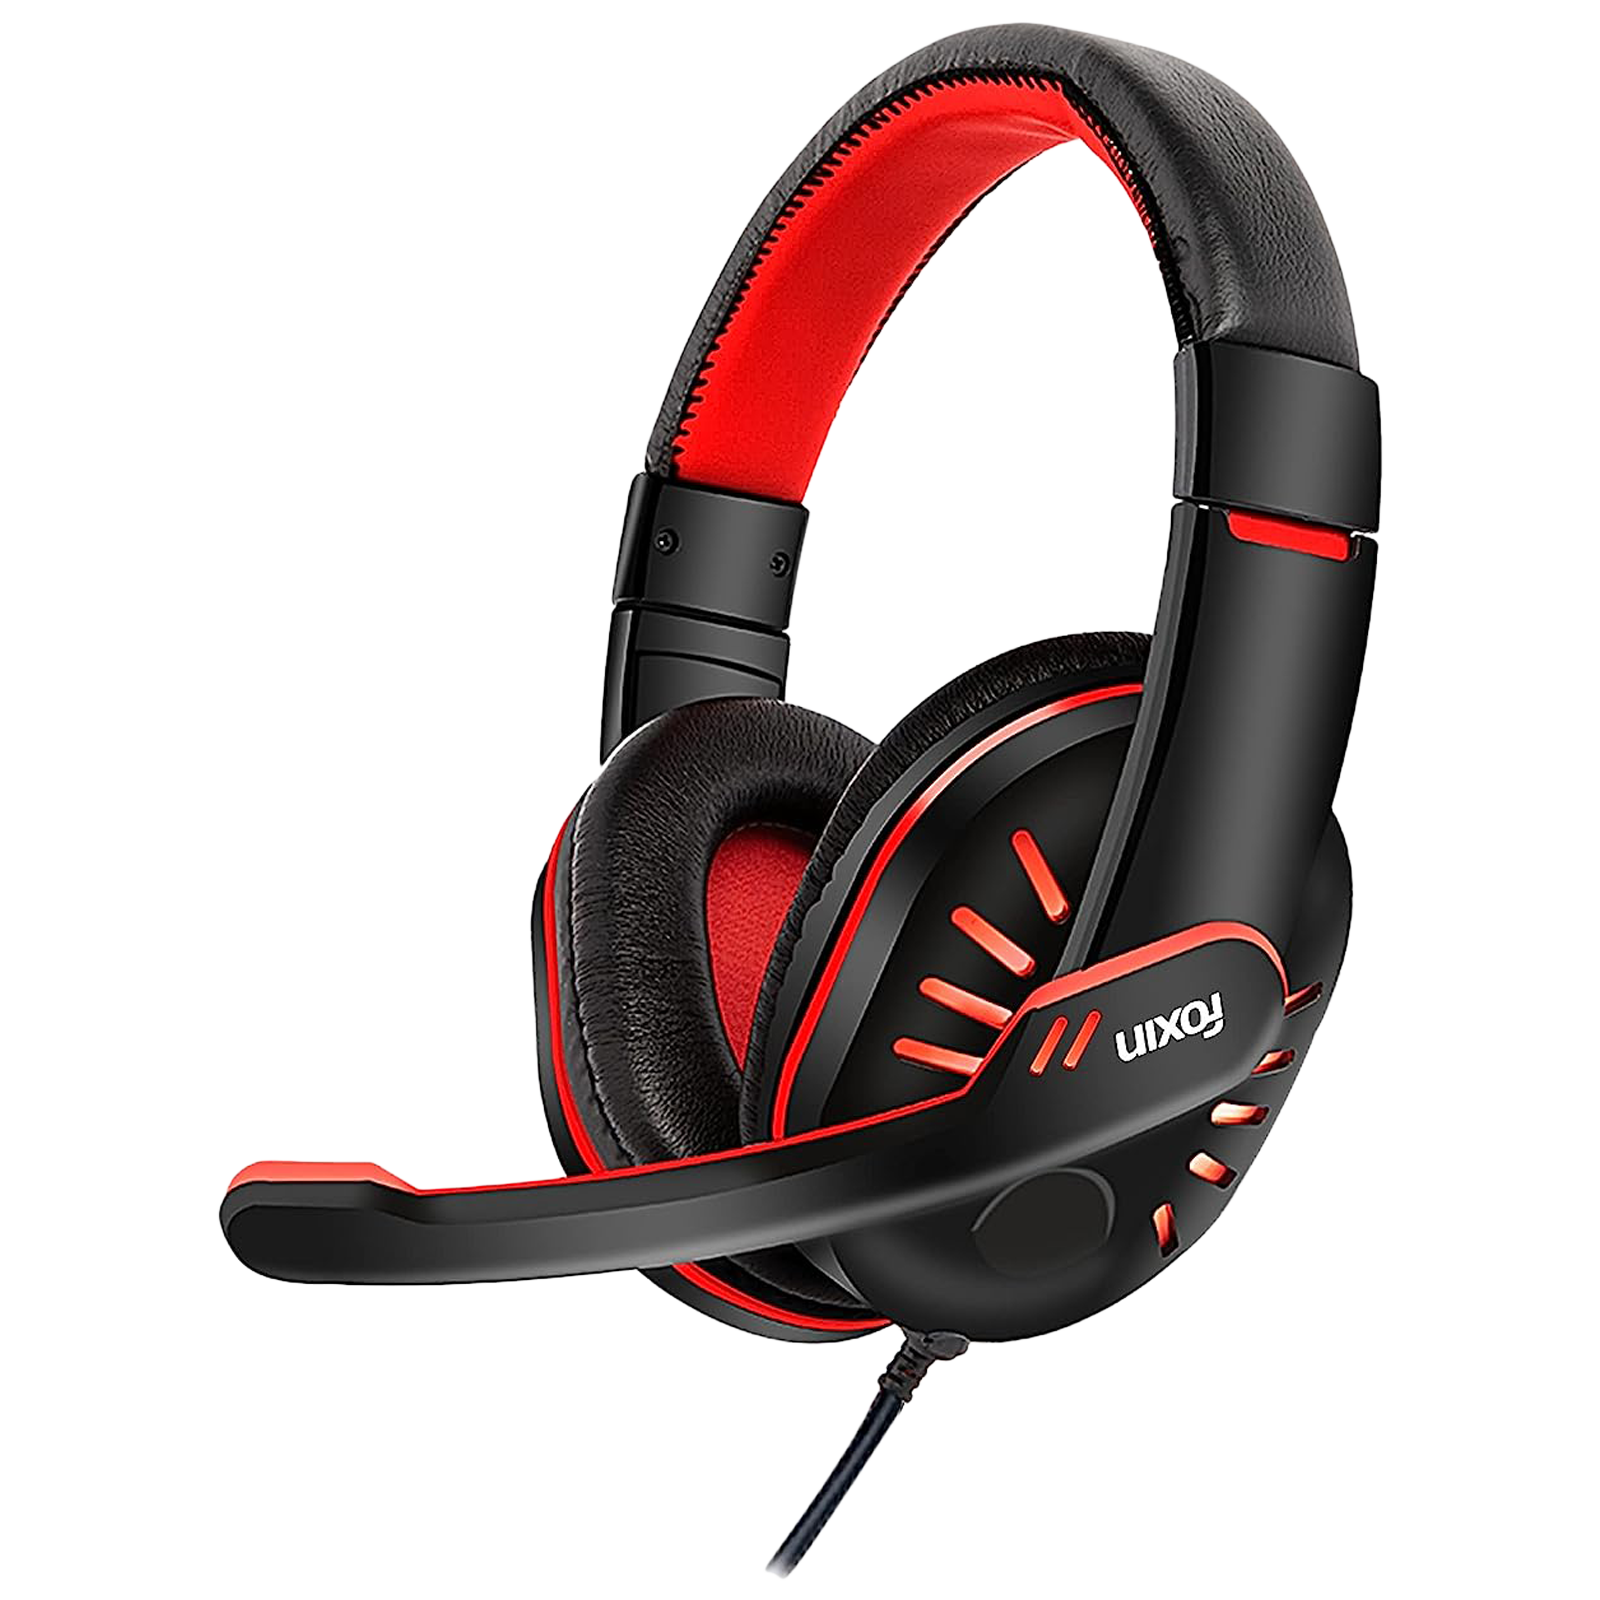 Foxin FHM TECHNO FOXHED0158 Wired Gaming Headset with Noise Cancellation (HIFI Surround Sound, Over Ear, Red and Black)